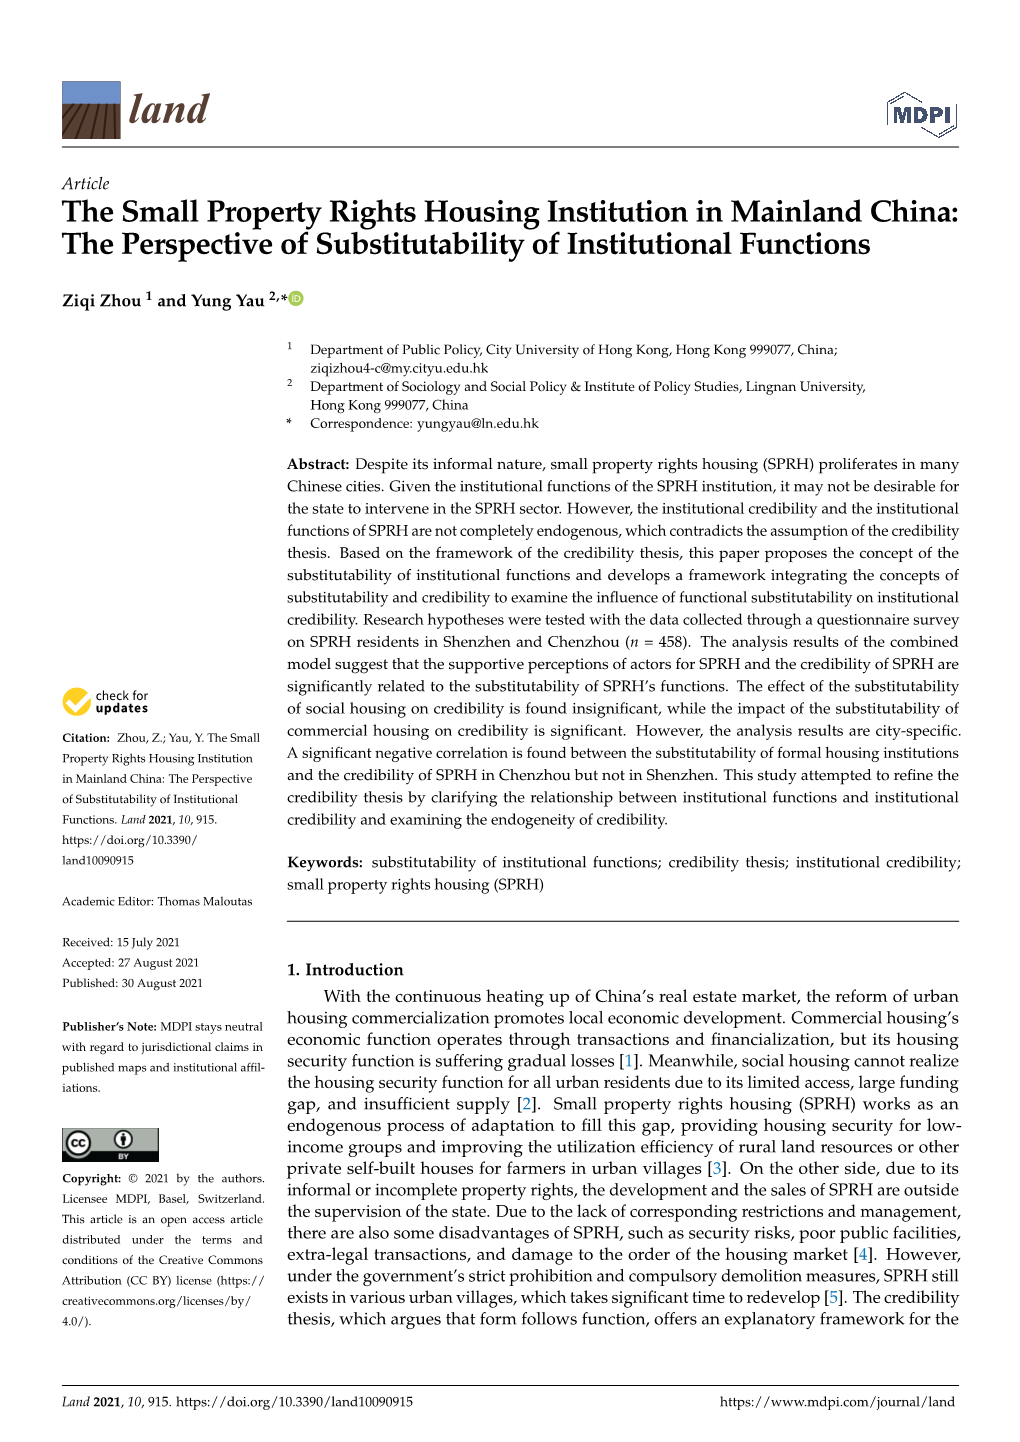 The Perspective of Substitutability of Institutional Functions